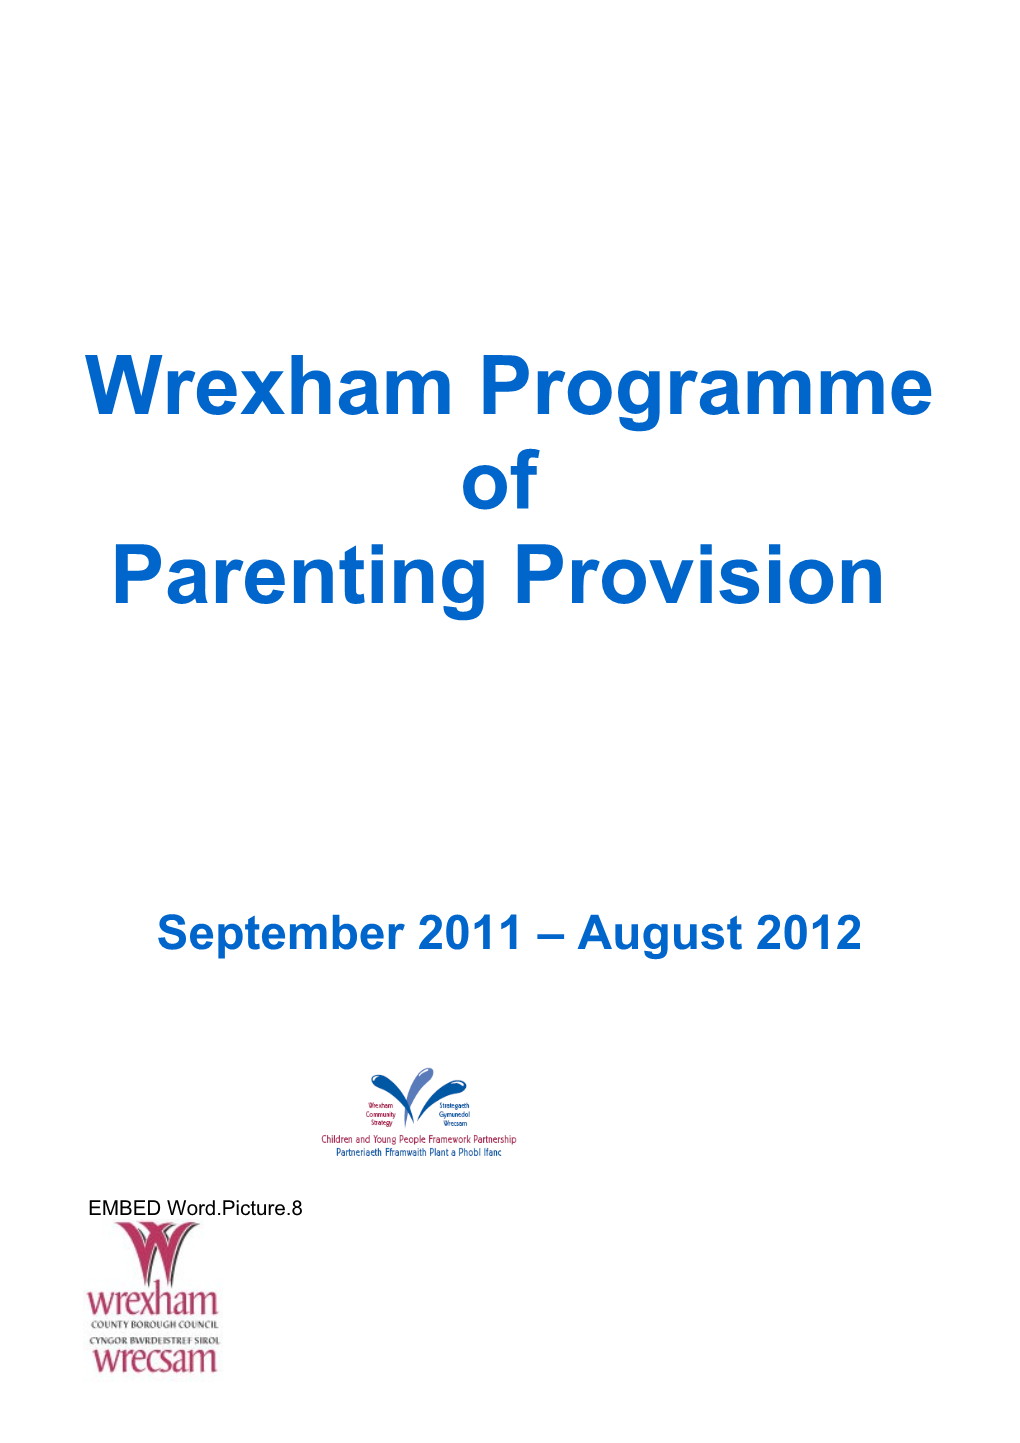 See Page 12/13 for Information About Parenting Programmes